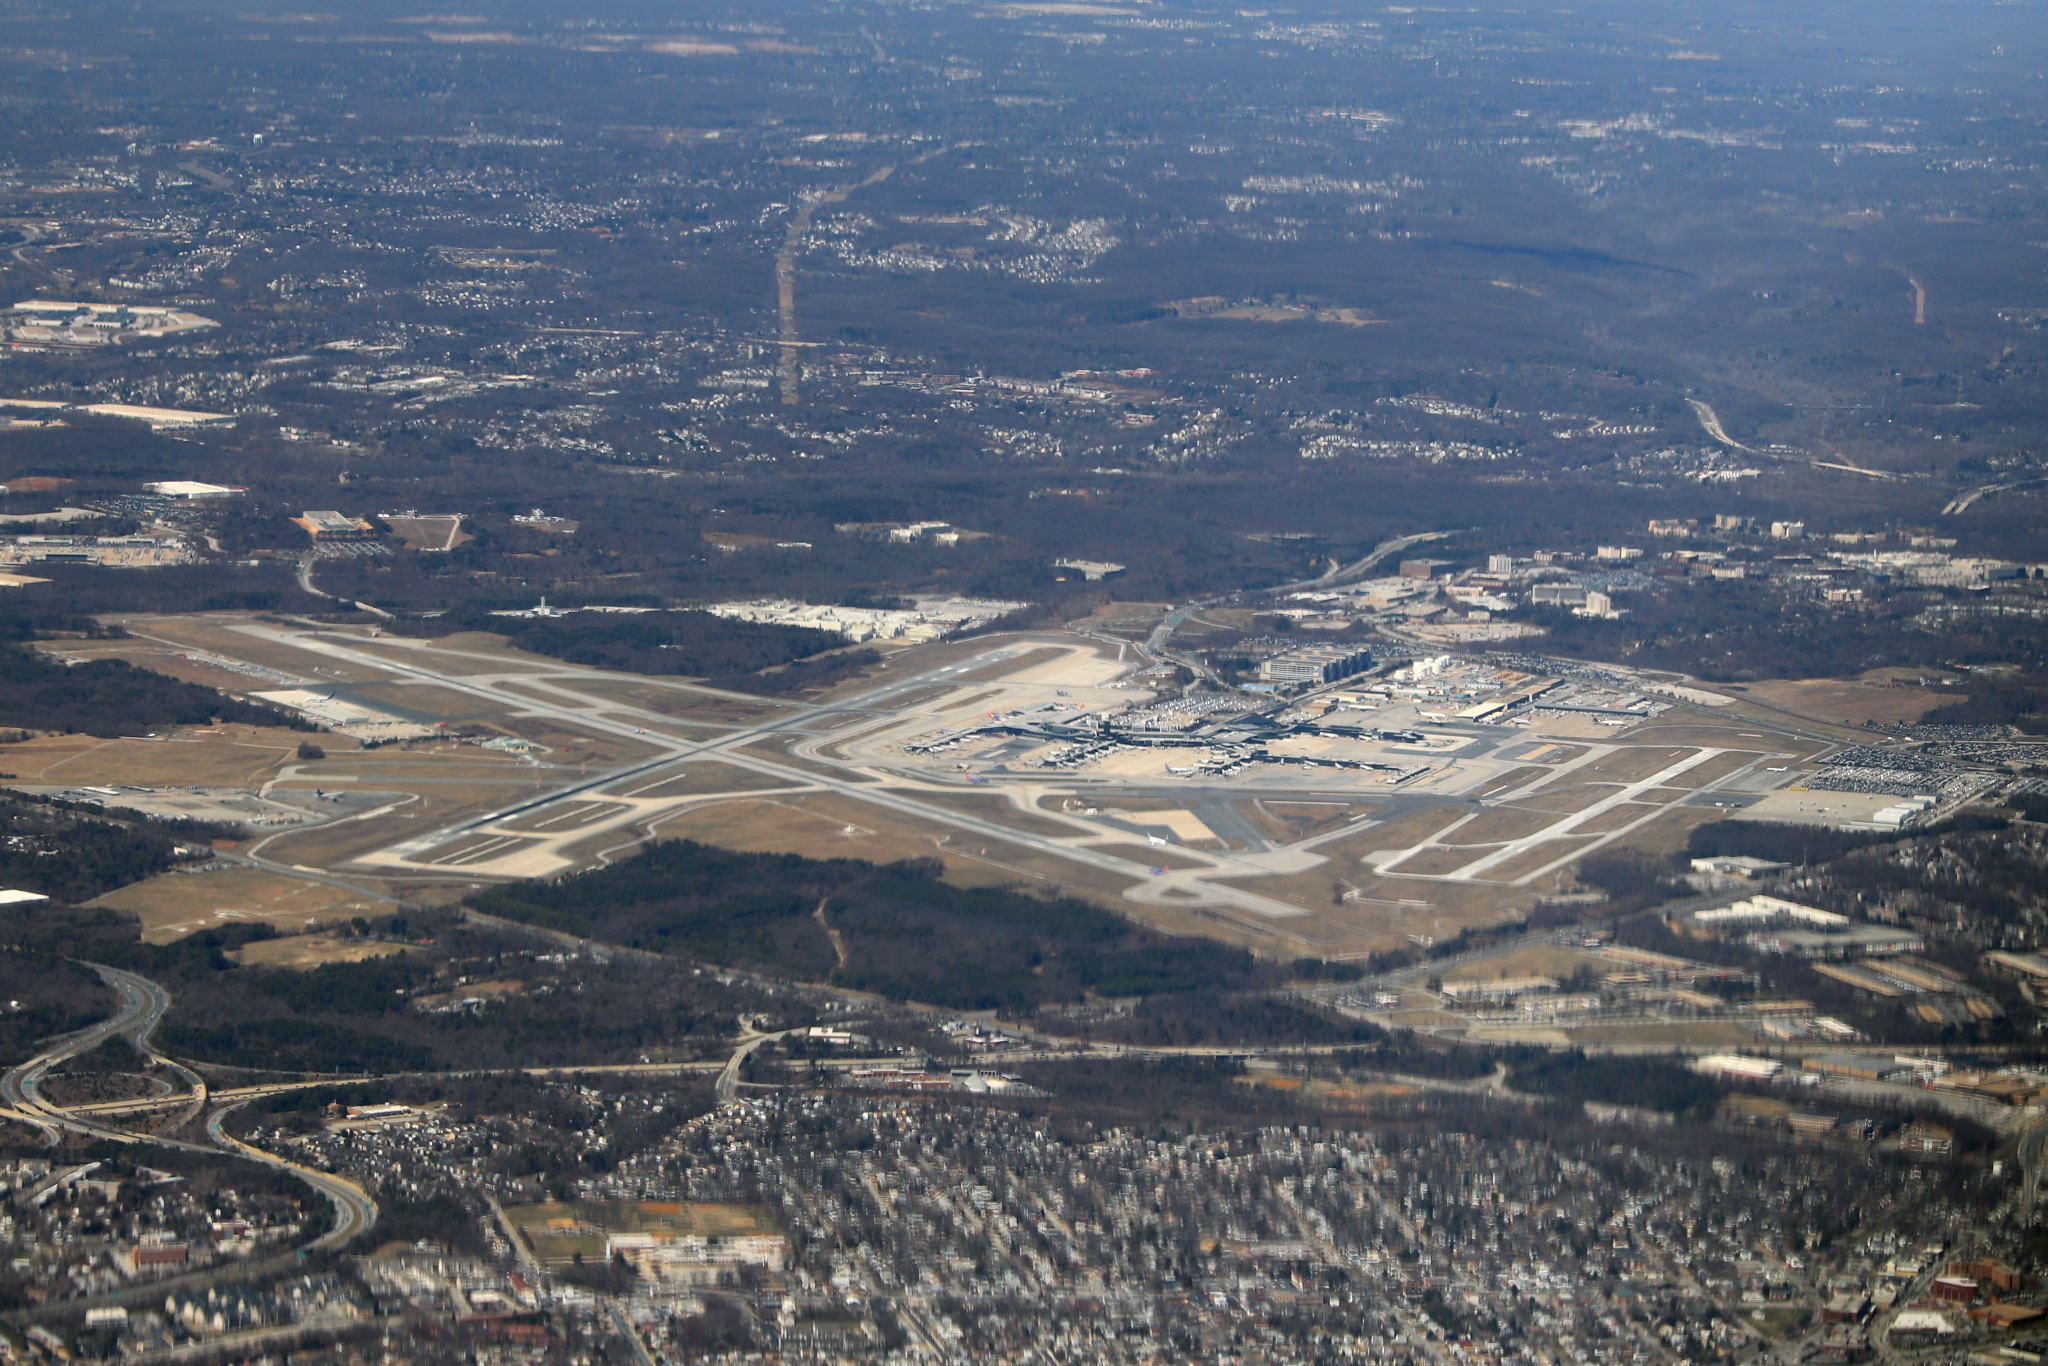  BWI Airport in Baltimore 